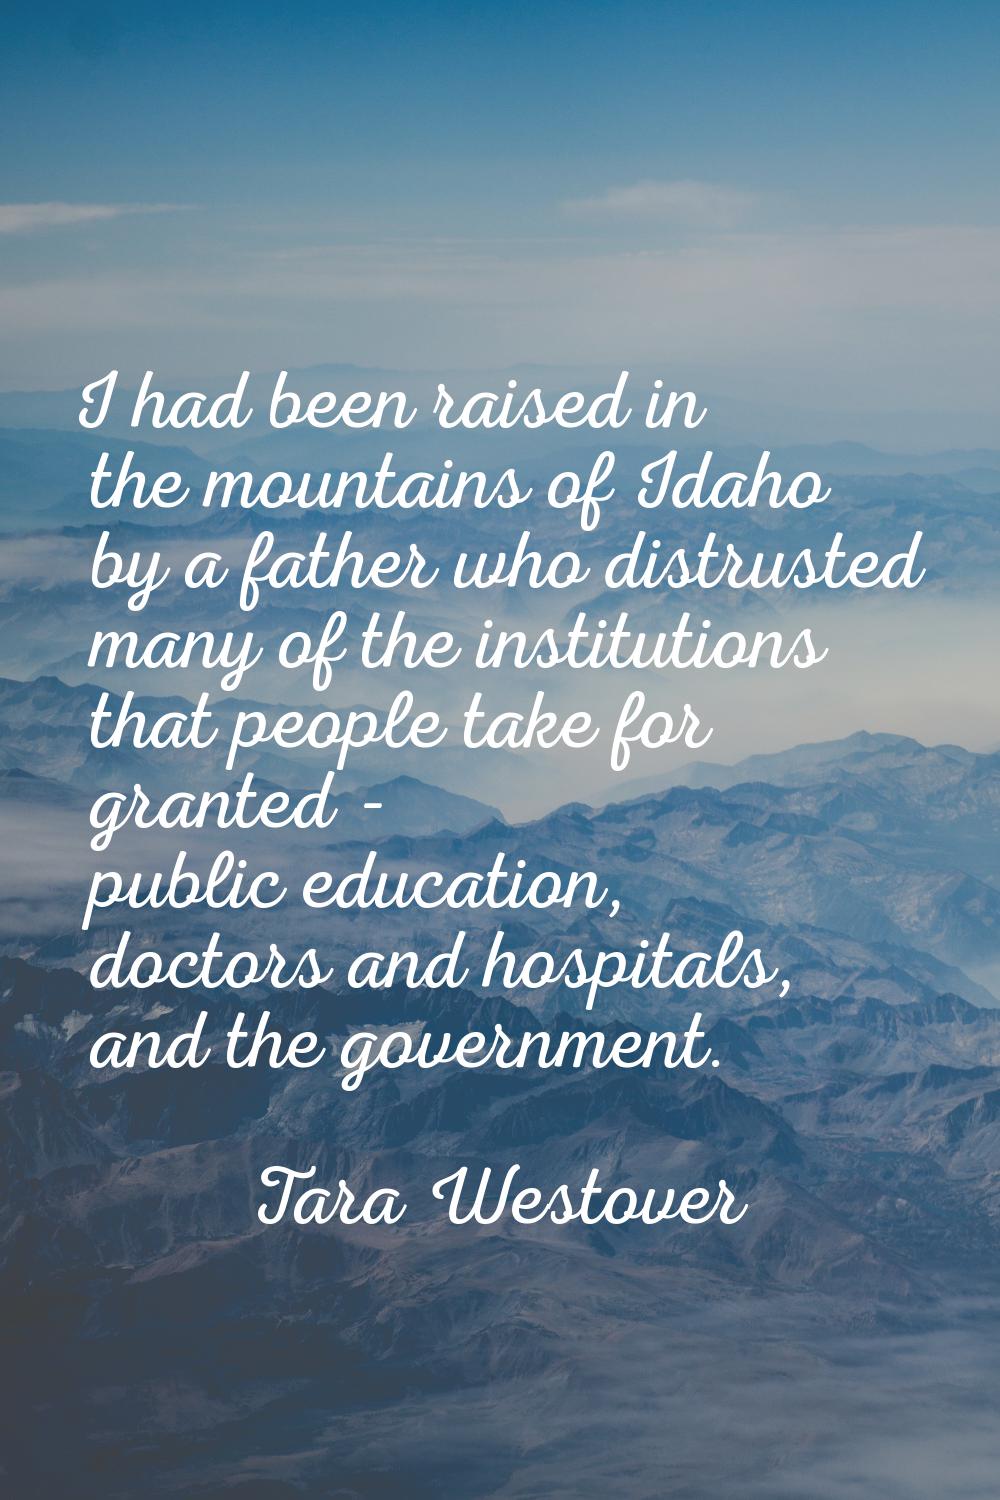 I had been raised in the mountains of Idaho by a father who distrusted many of the institutions tha